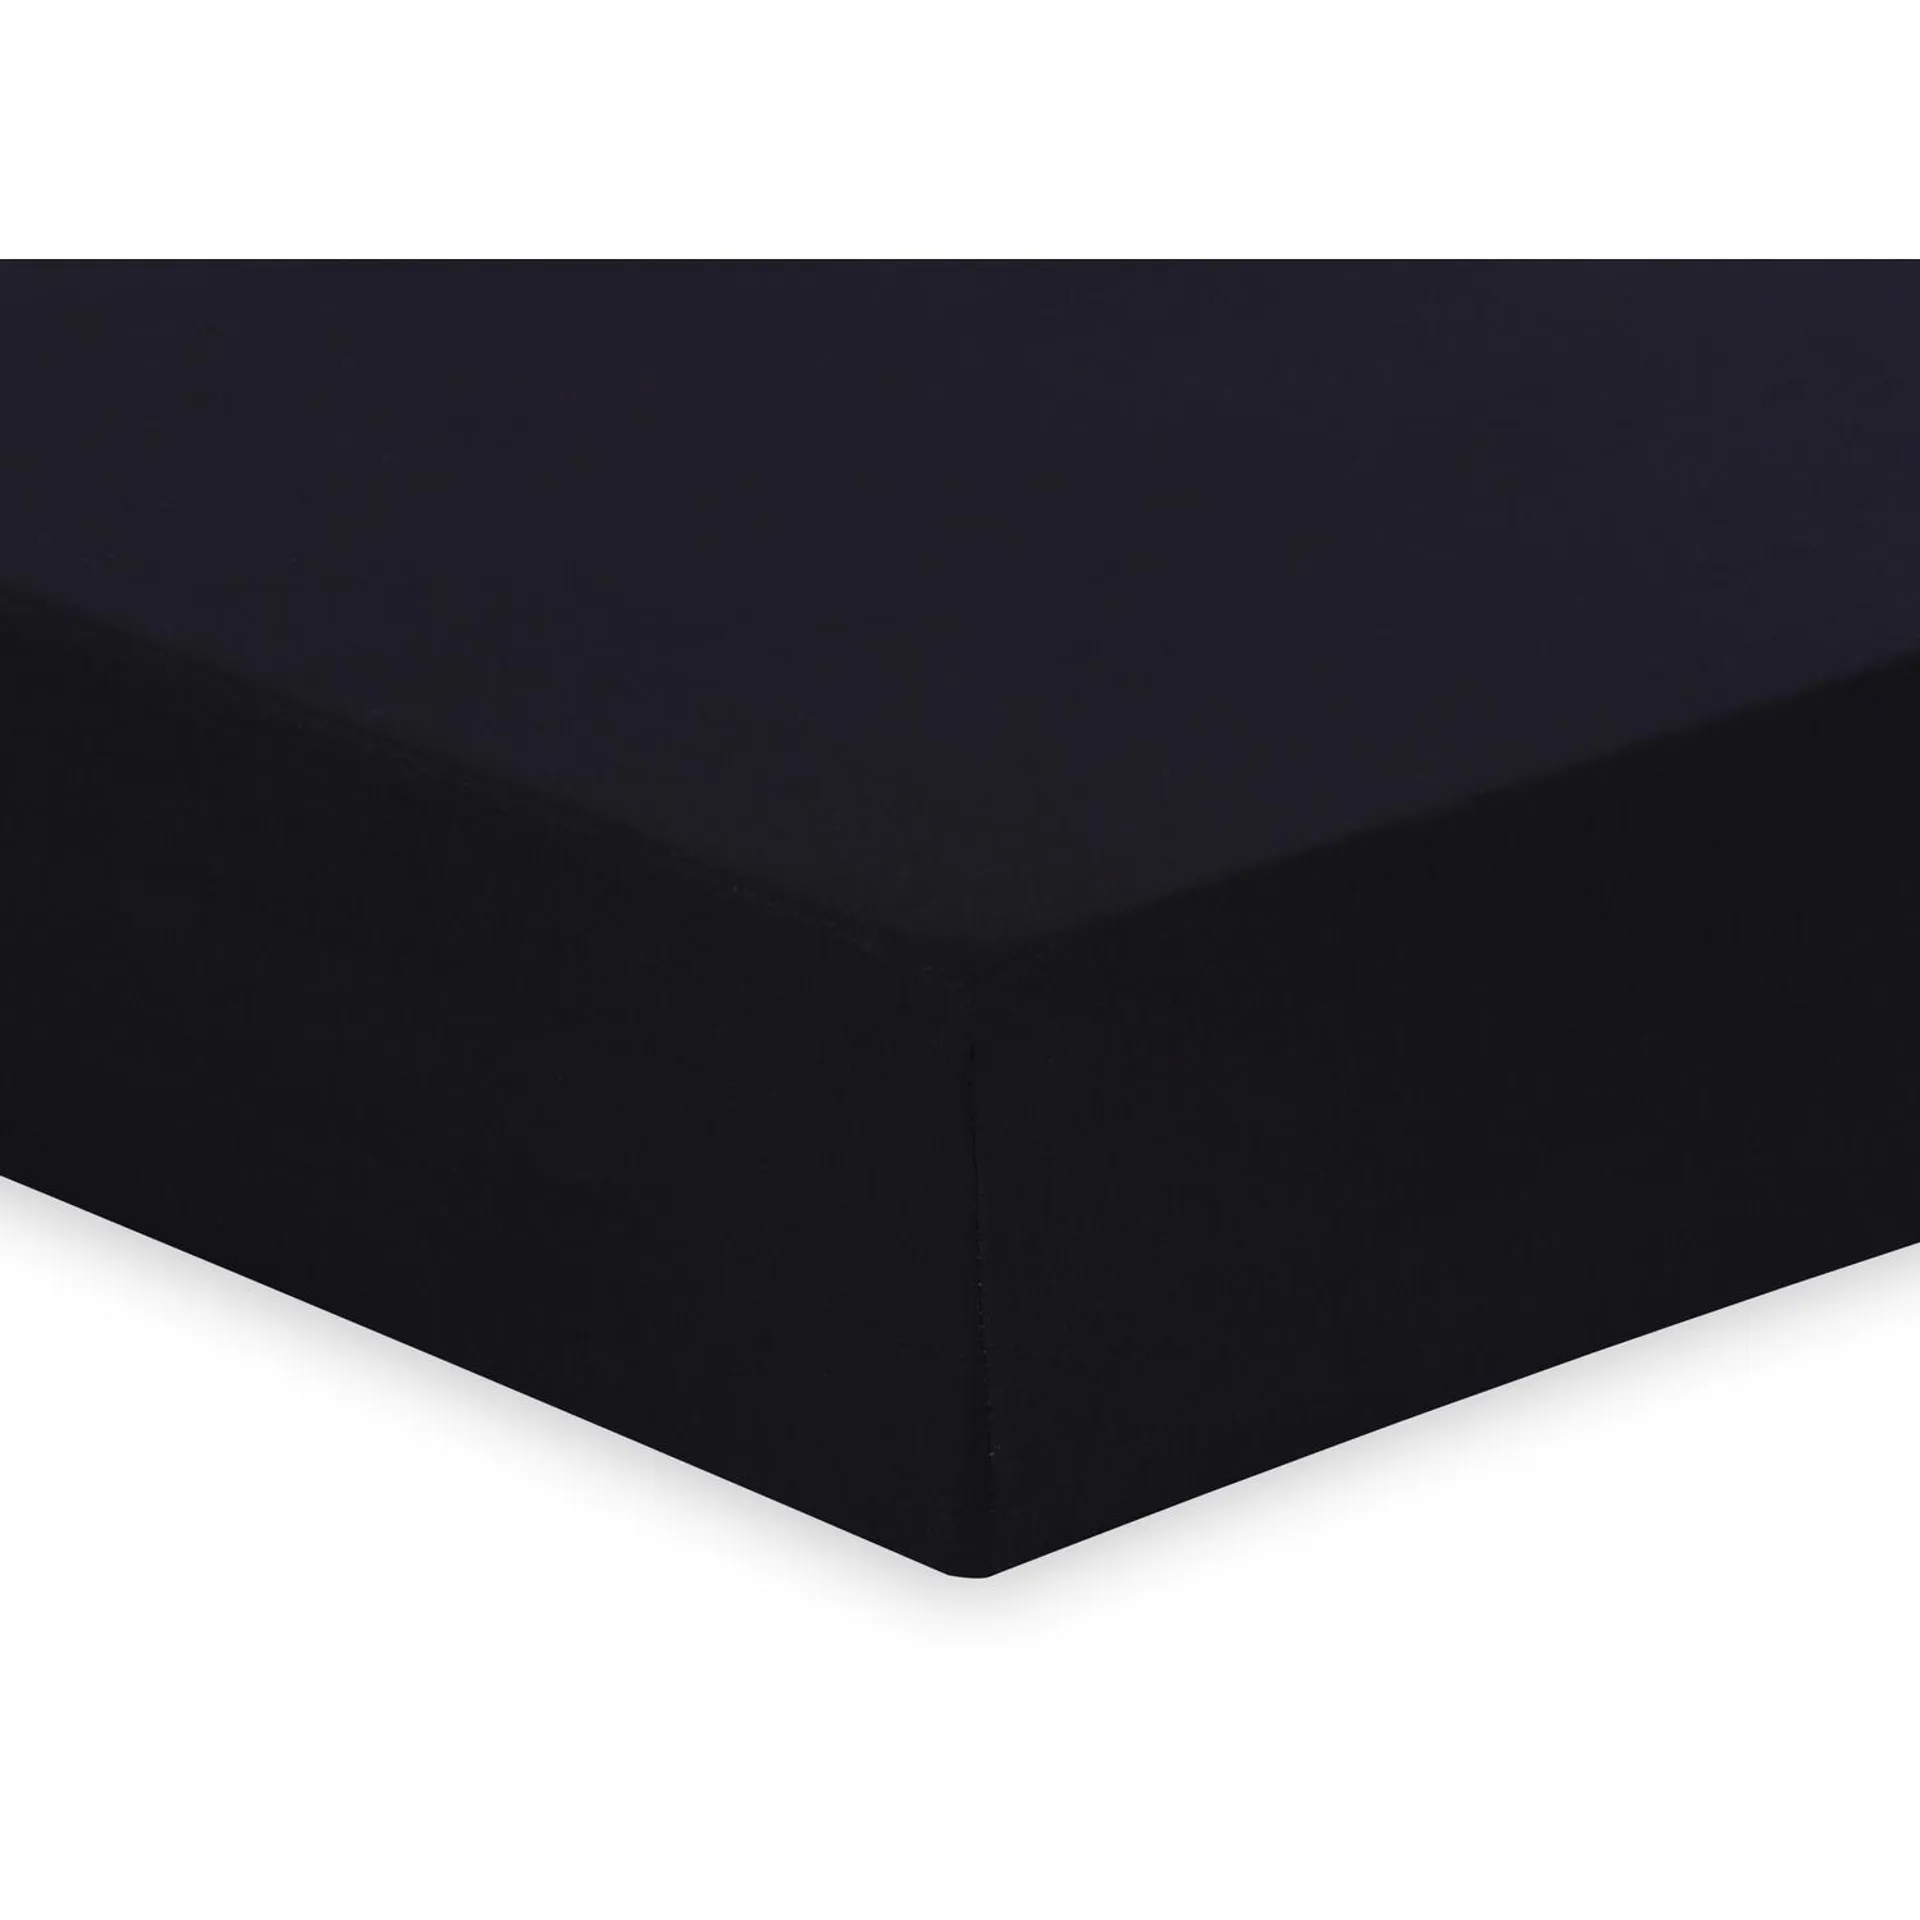 My Home King Black Polycotton Fitted Sheet